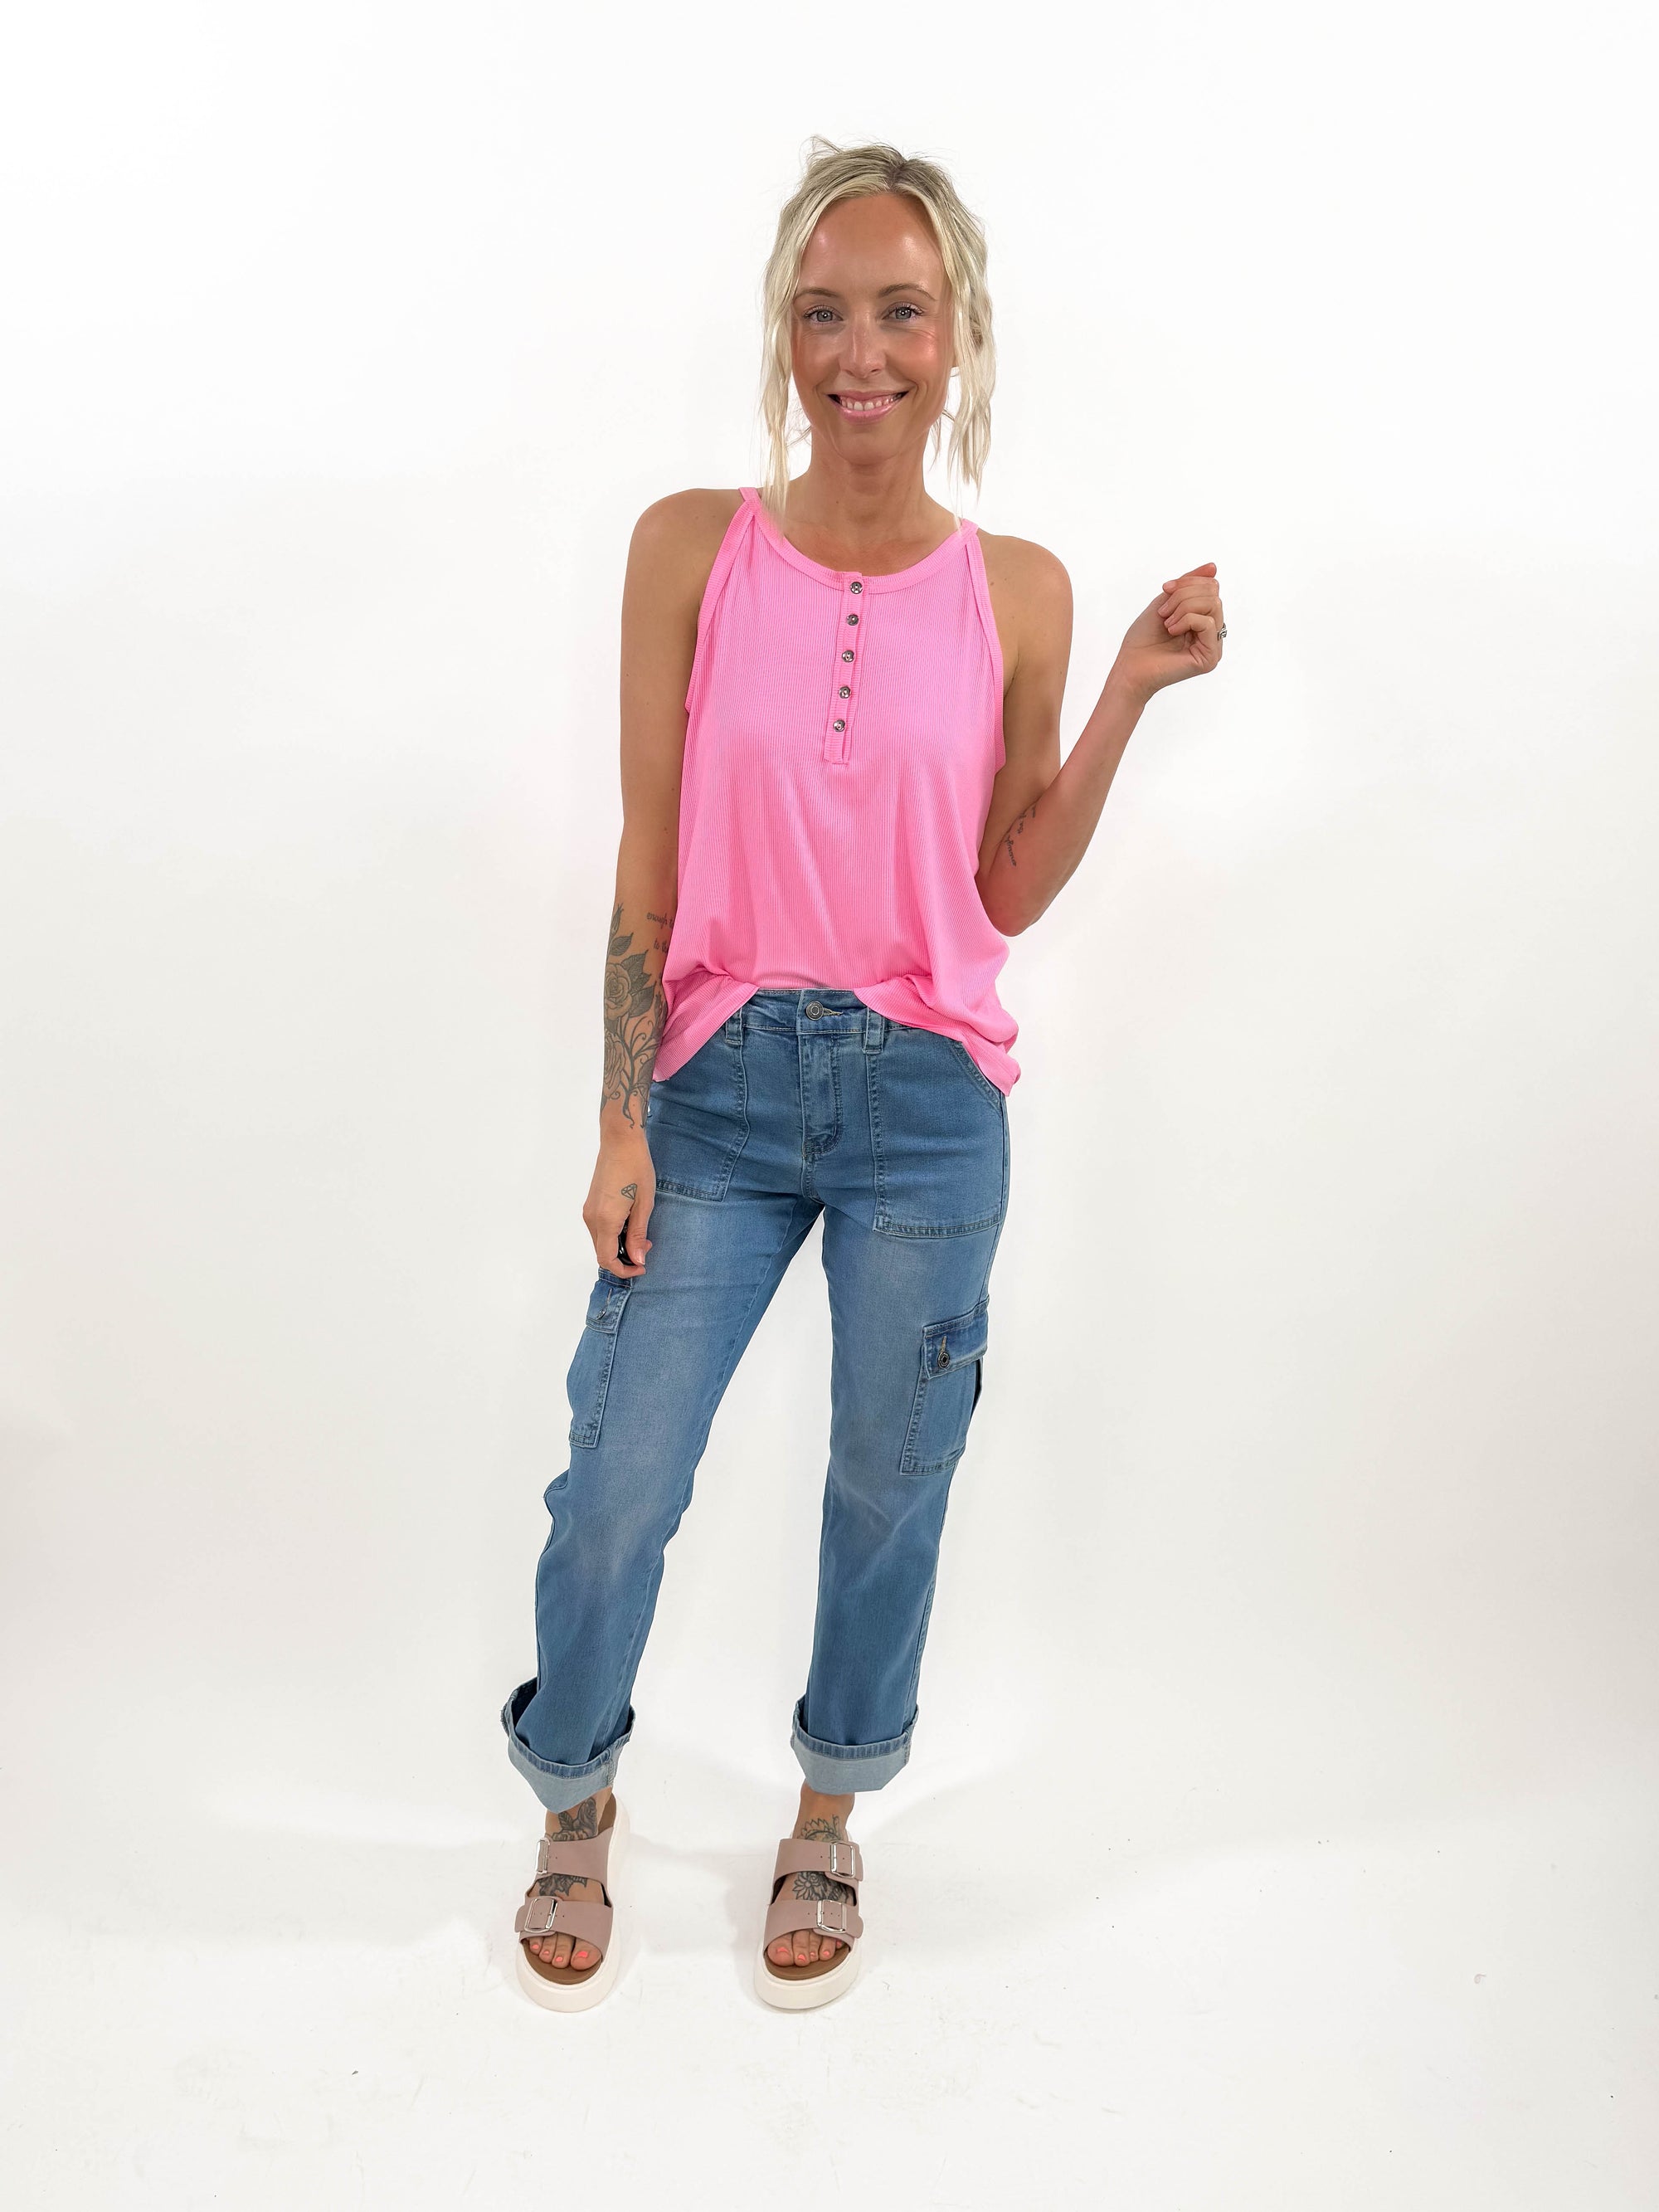 Livin' Easy Halter Top- CANDY PINK